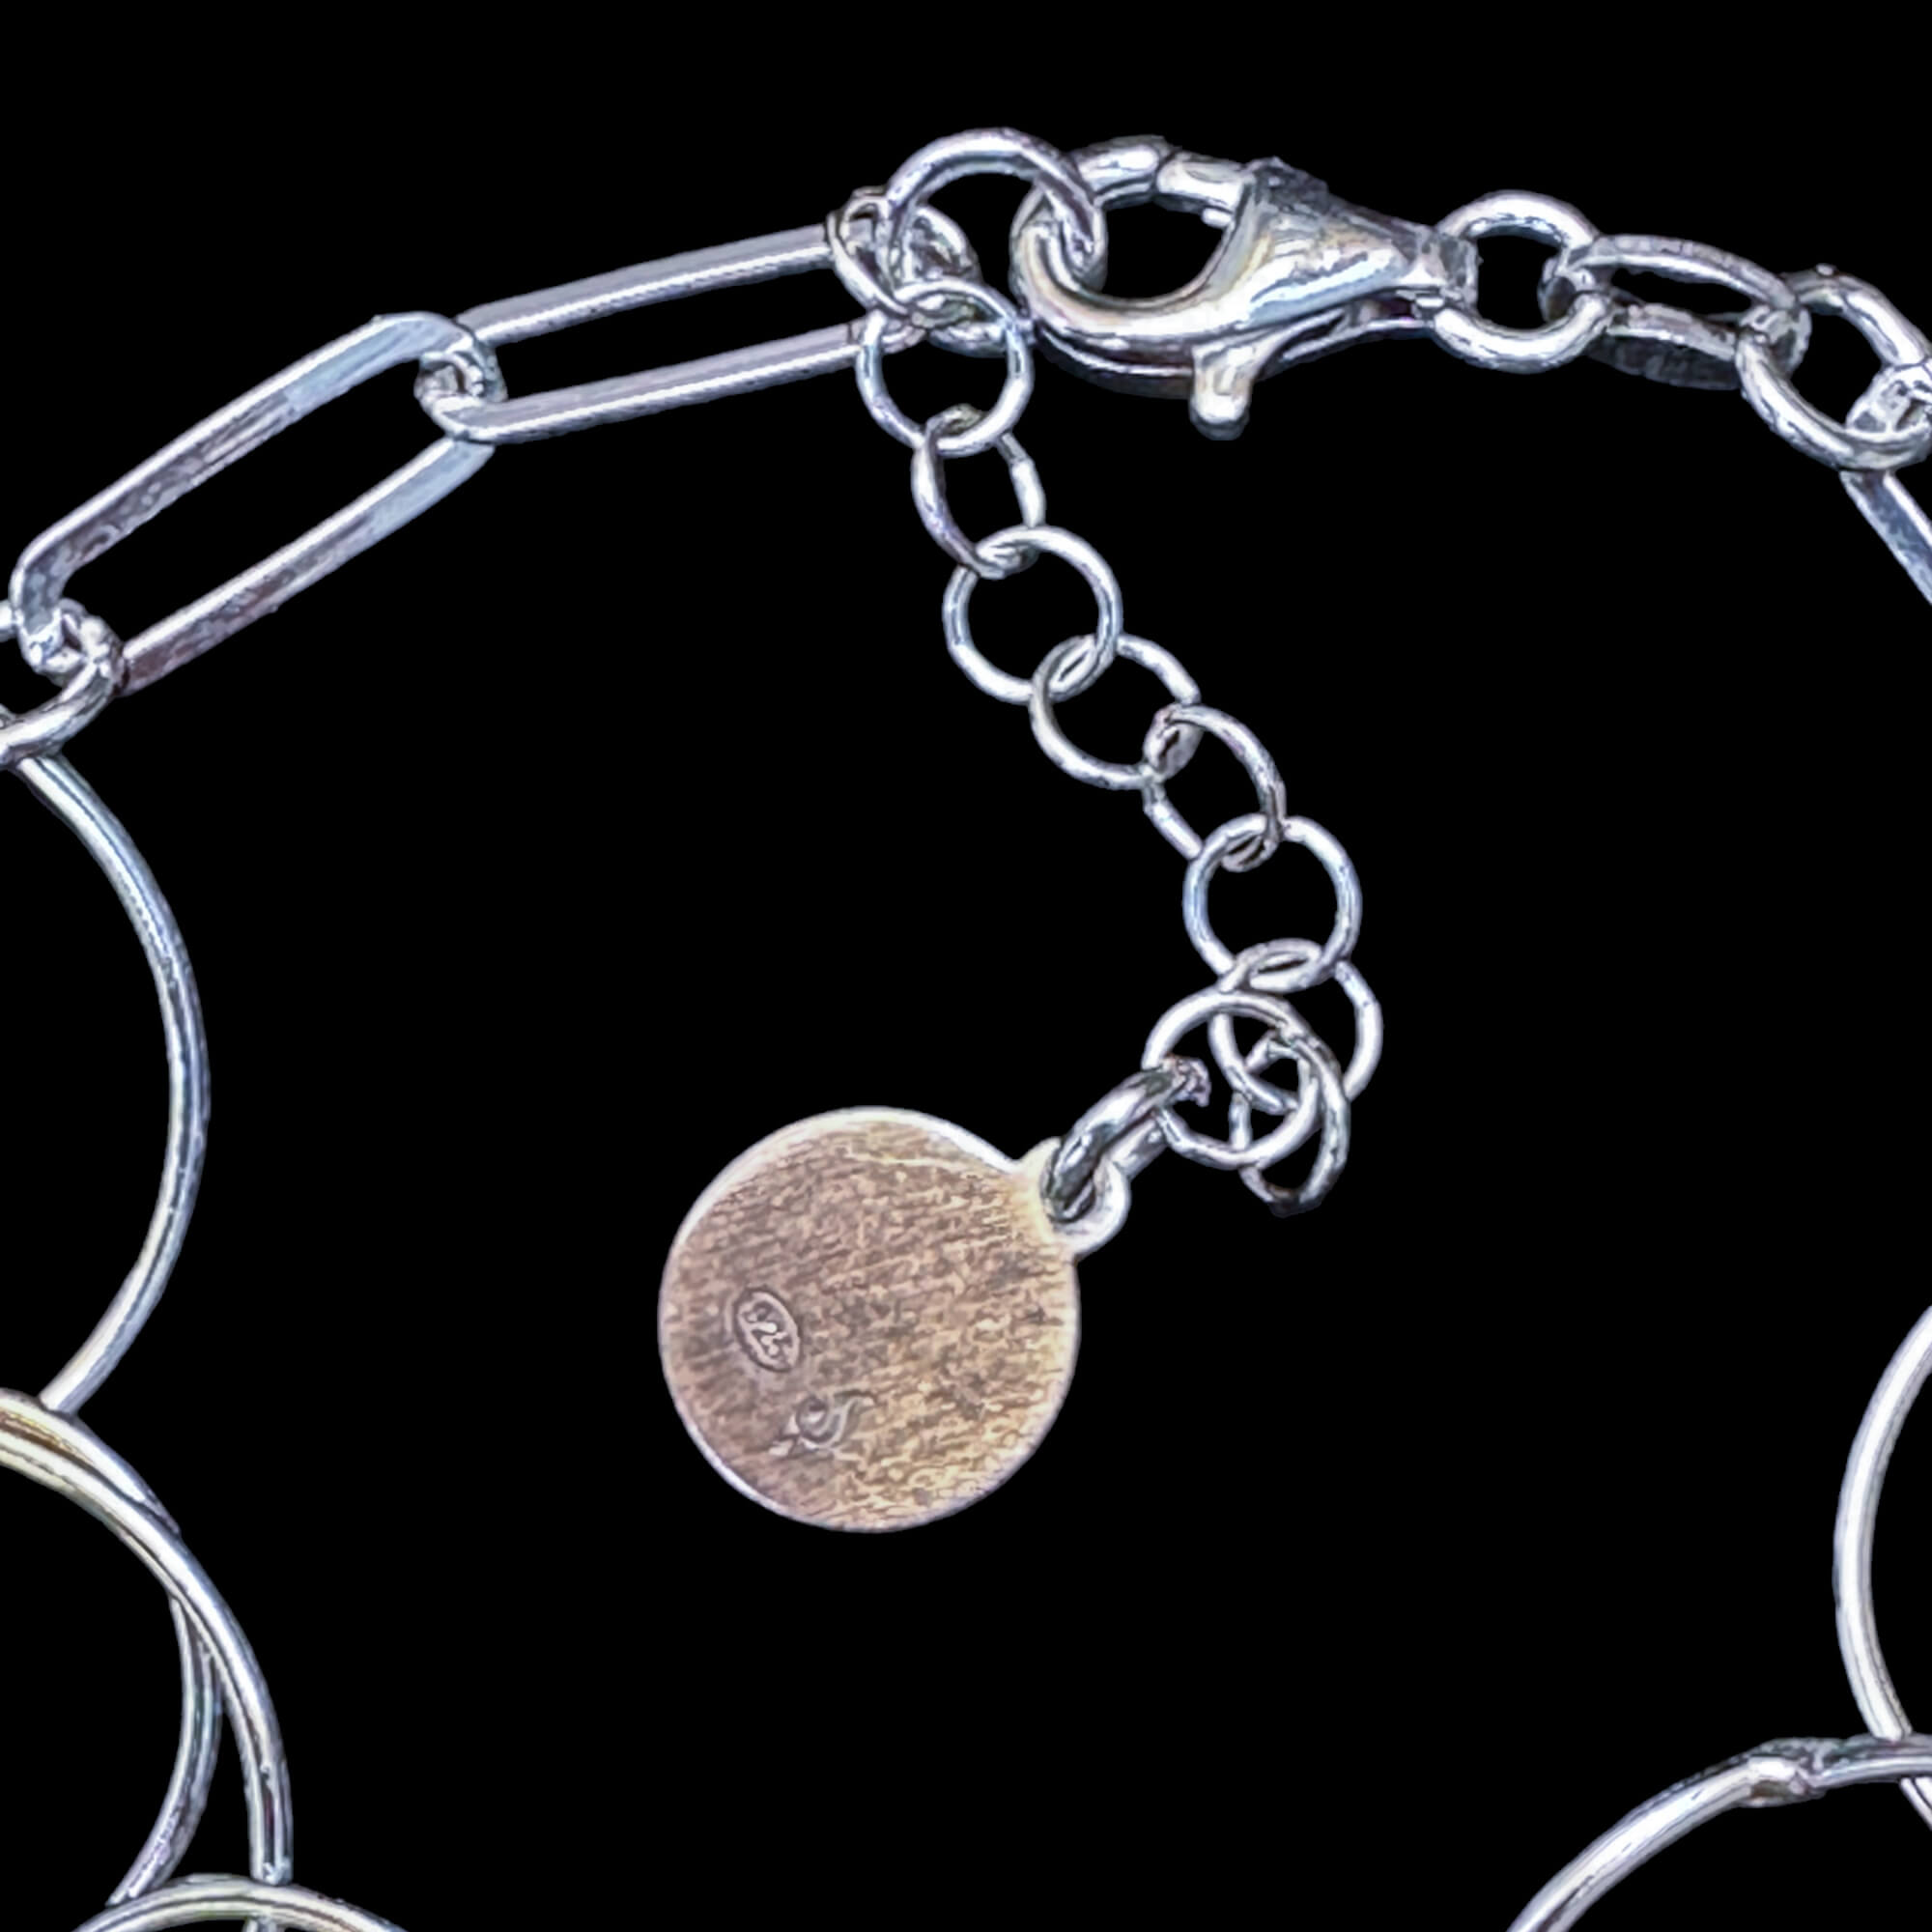 Open and closed round silver link bracelet